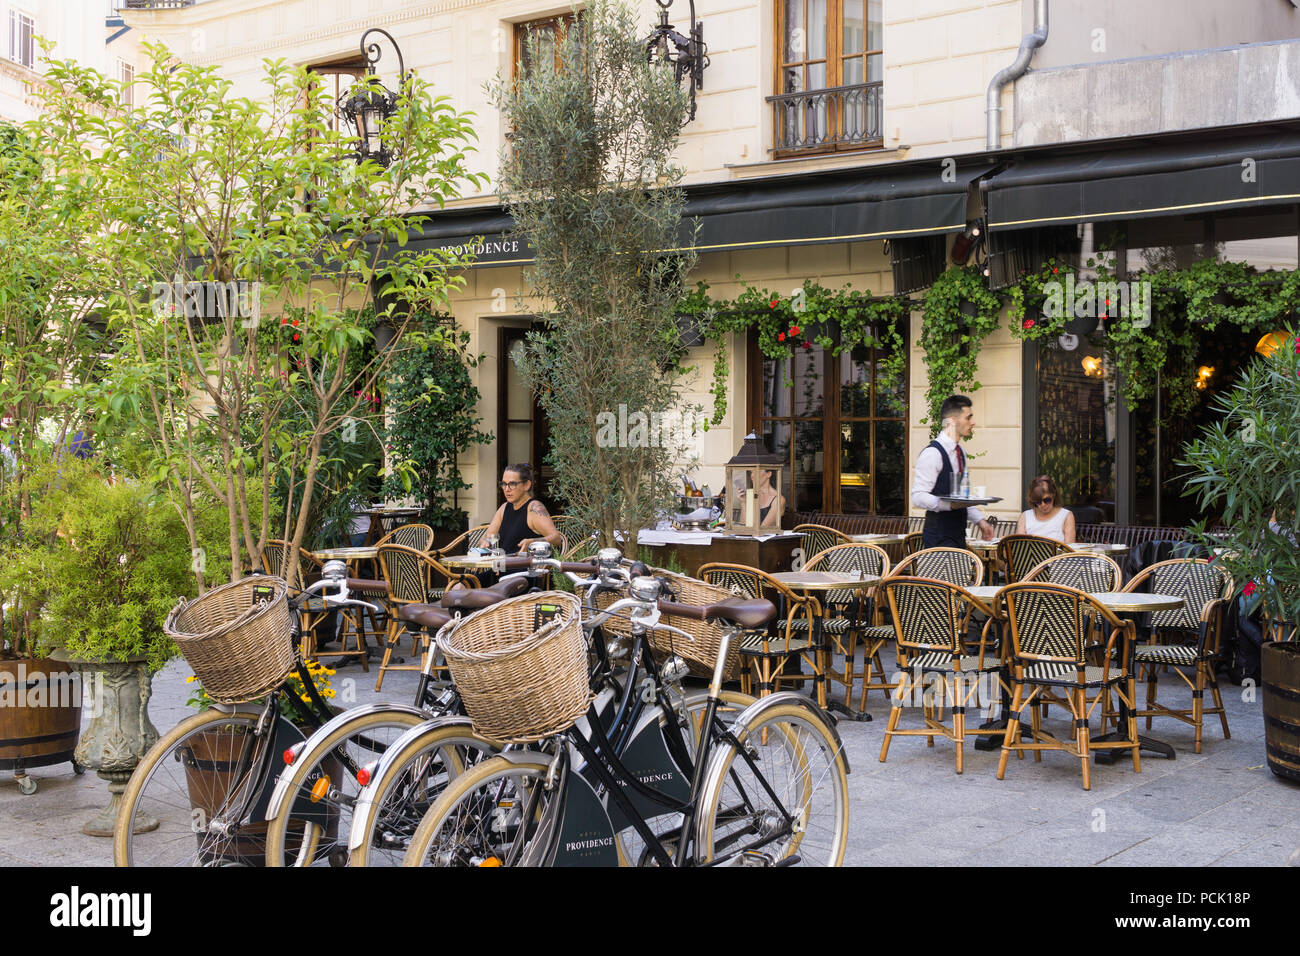 Paris cafe morning - a morning scene at a Paris cafe in the 10th arrondissement, France, Europe. Stock Photo